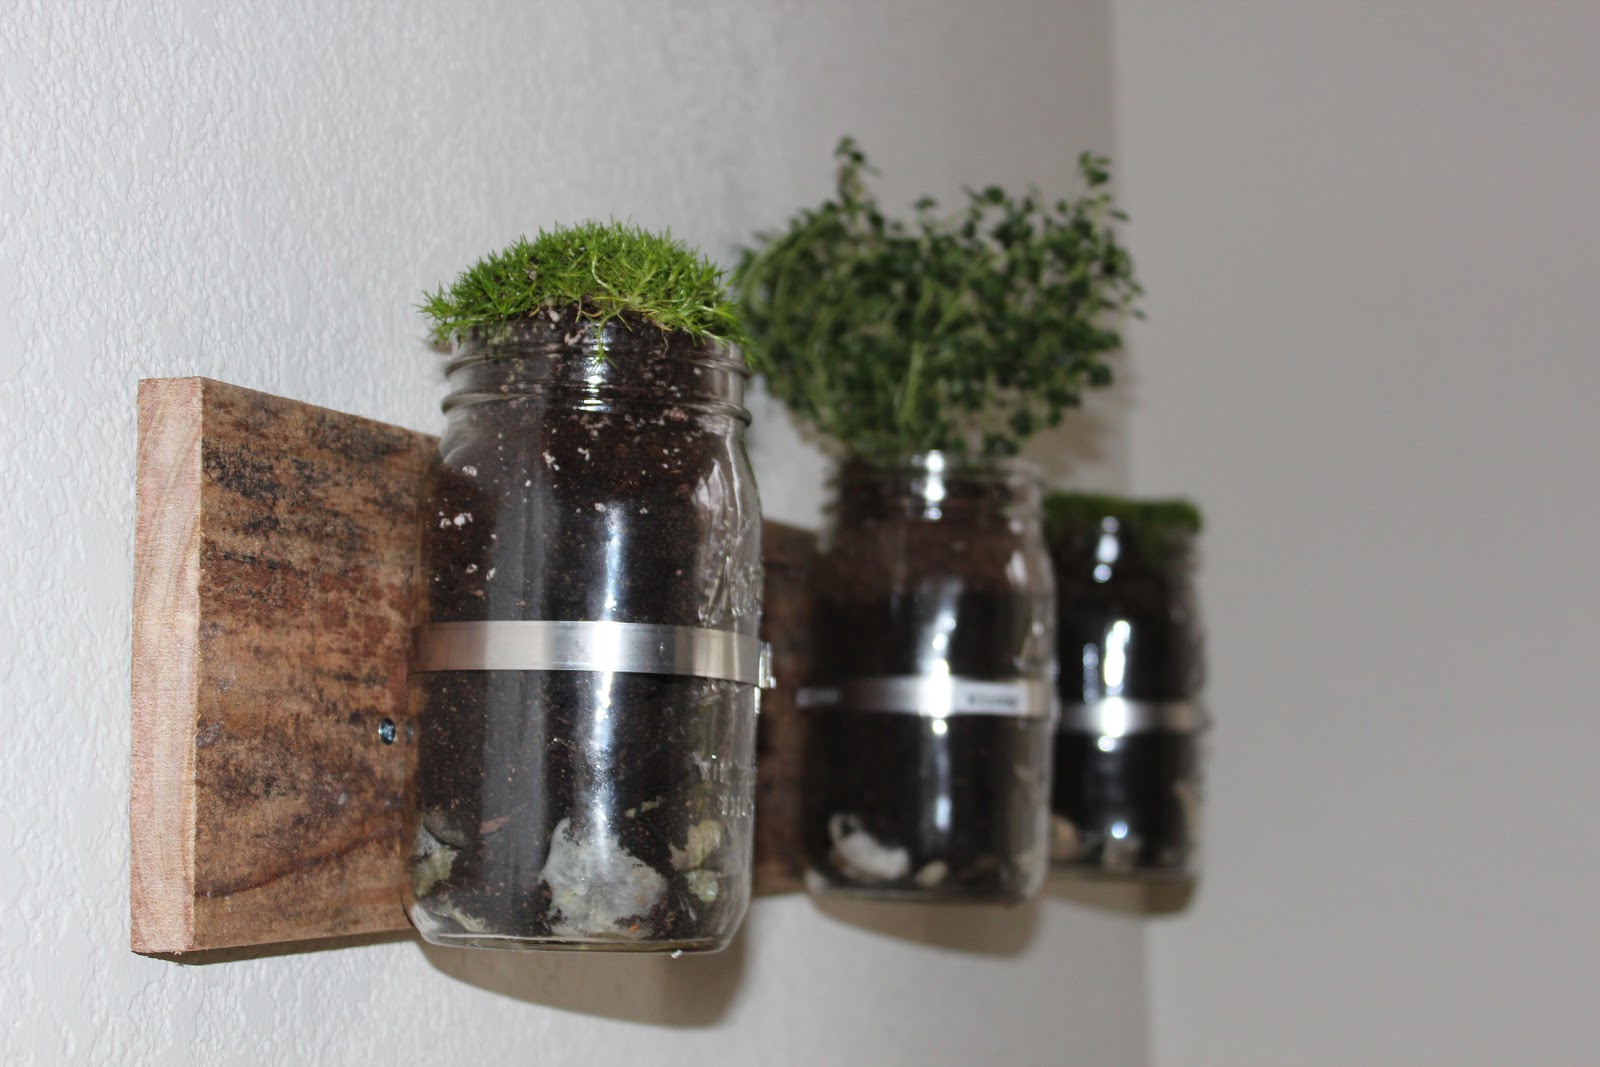 Nic and Knack: D.I.Y Wall Planter with Mason Jars